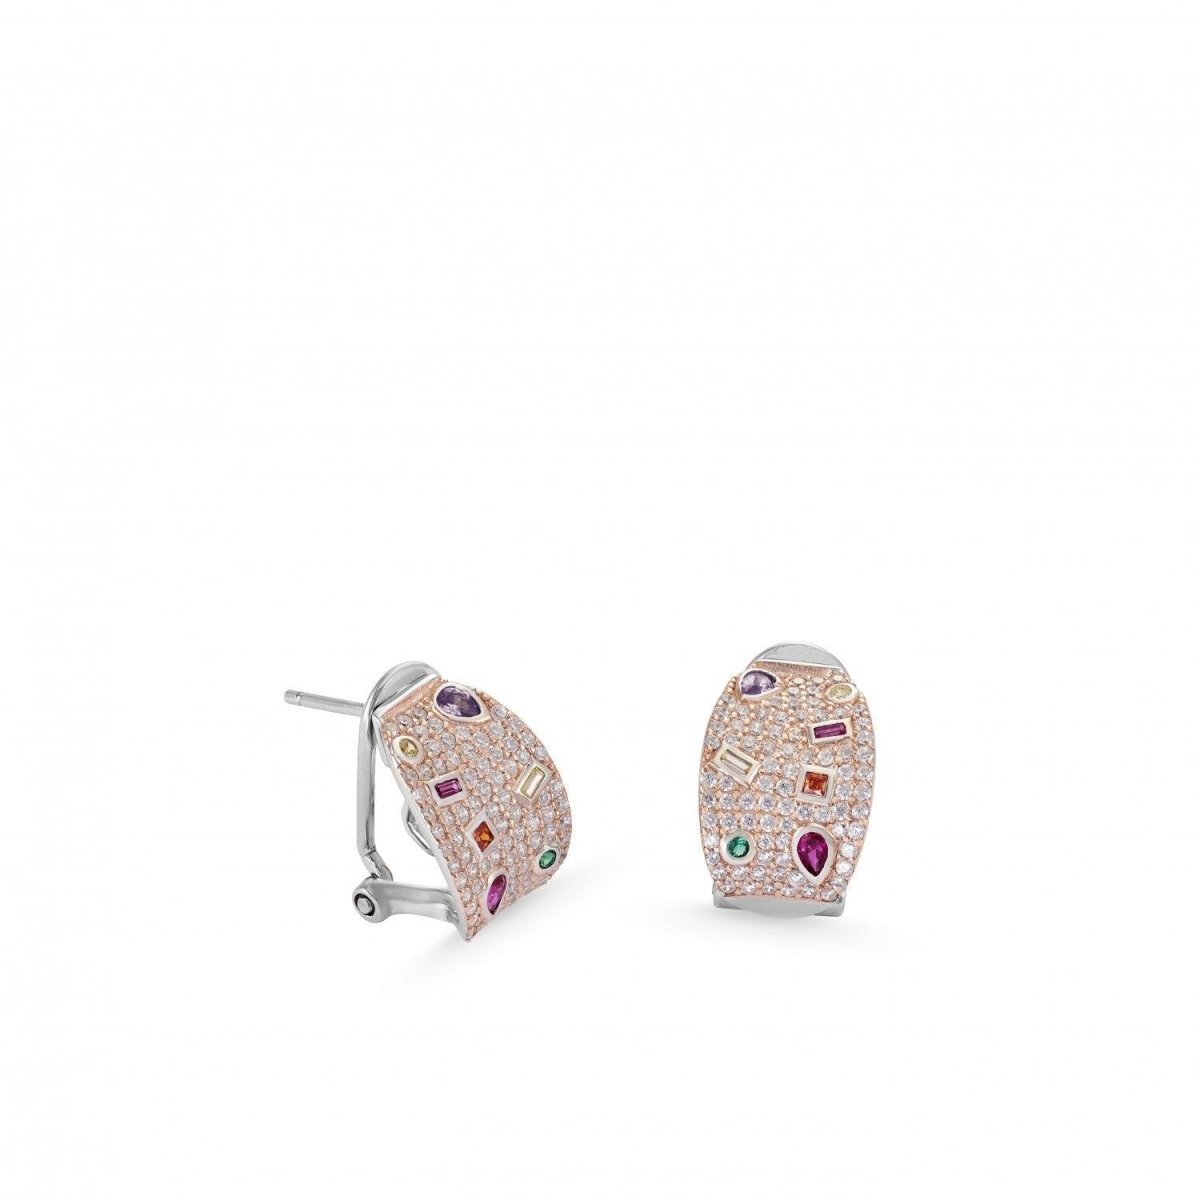 Earrings - Earrings with omega clasp design set with zirconia and gemstones